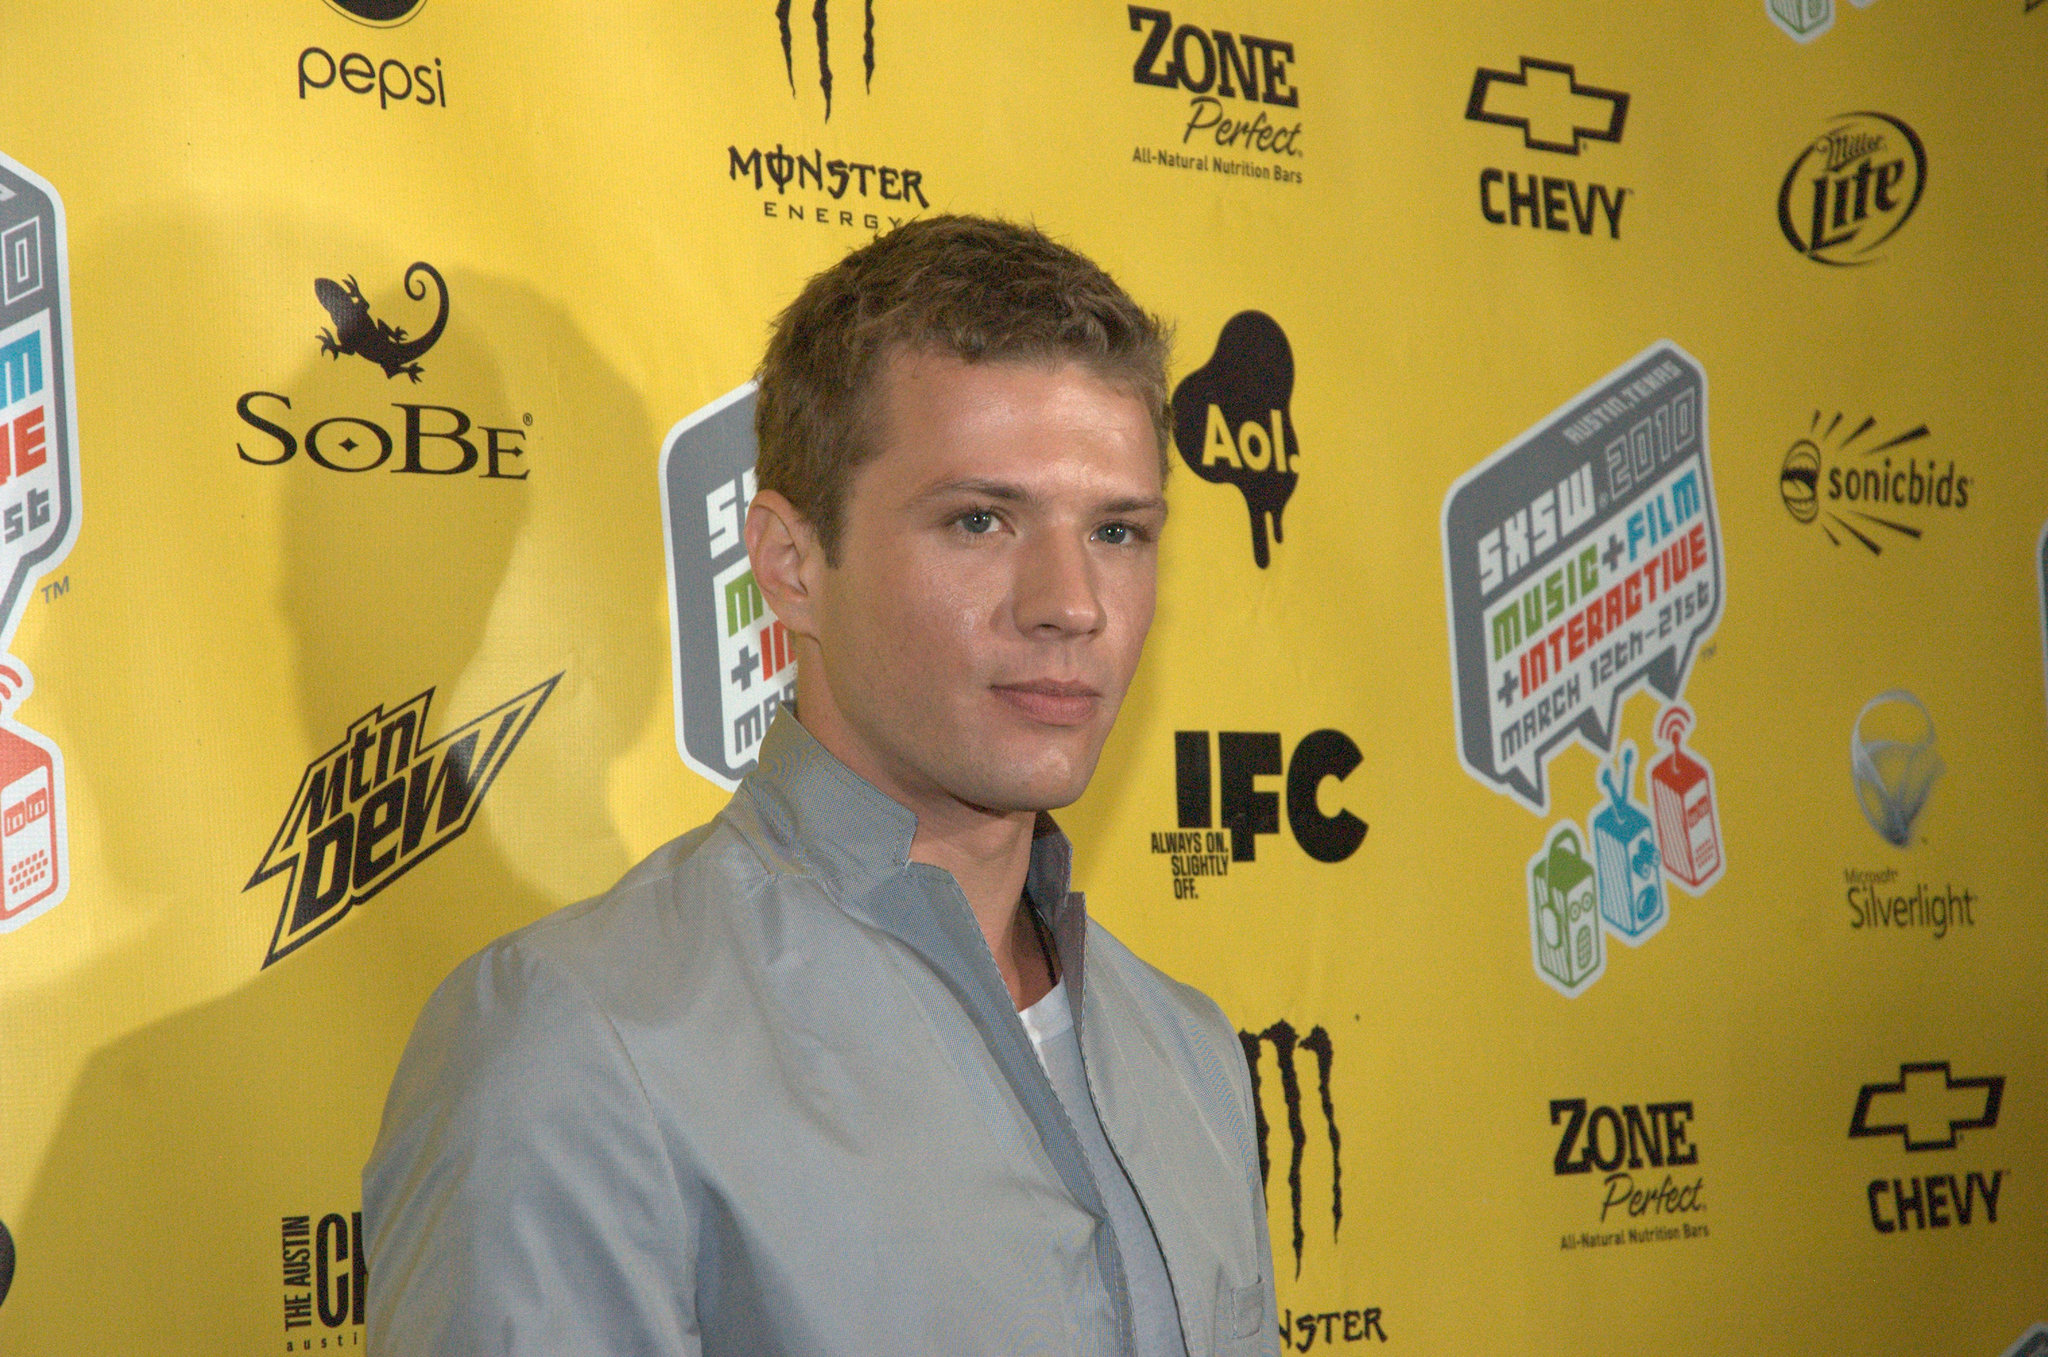 Ryan Phillippe at event of MacGruber (2010)